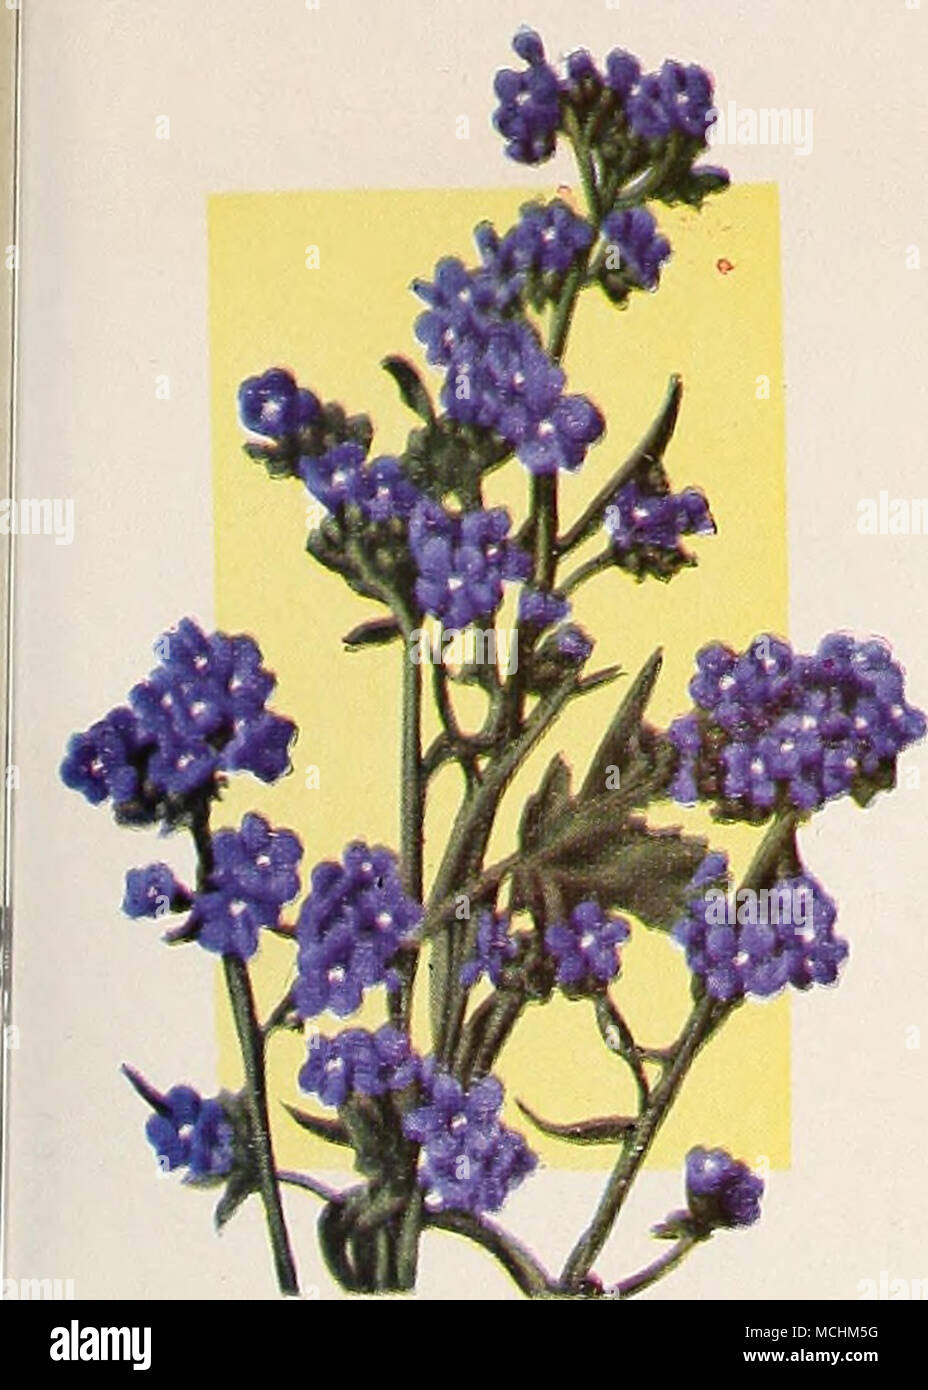 . No. 1136 Anchusa 1136 Capensis Blue Bird. Flowers of a vivid indigo blue. Plants are compact and of even habit, in marked contrast to other annual varieties. 15 cts. per pkt.; 50 cts. per l/i oz. Giant Candytuft 1753 Improved Empress. A wonderfully improved strain of the popular Empress Candy- tuft, forming much branched plants about 18 inches high, each branch terminated by an immense spike of very large individual pure white flowers. Makes a very effective white bed or border, and is invaluable for cutting. 10 cts. per pkt.; 40 cts per Yi oz.; 75 cts. per oz. Clarkia Elegans 1983 Vesuvius. Stock Photo